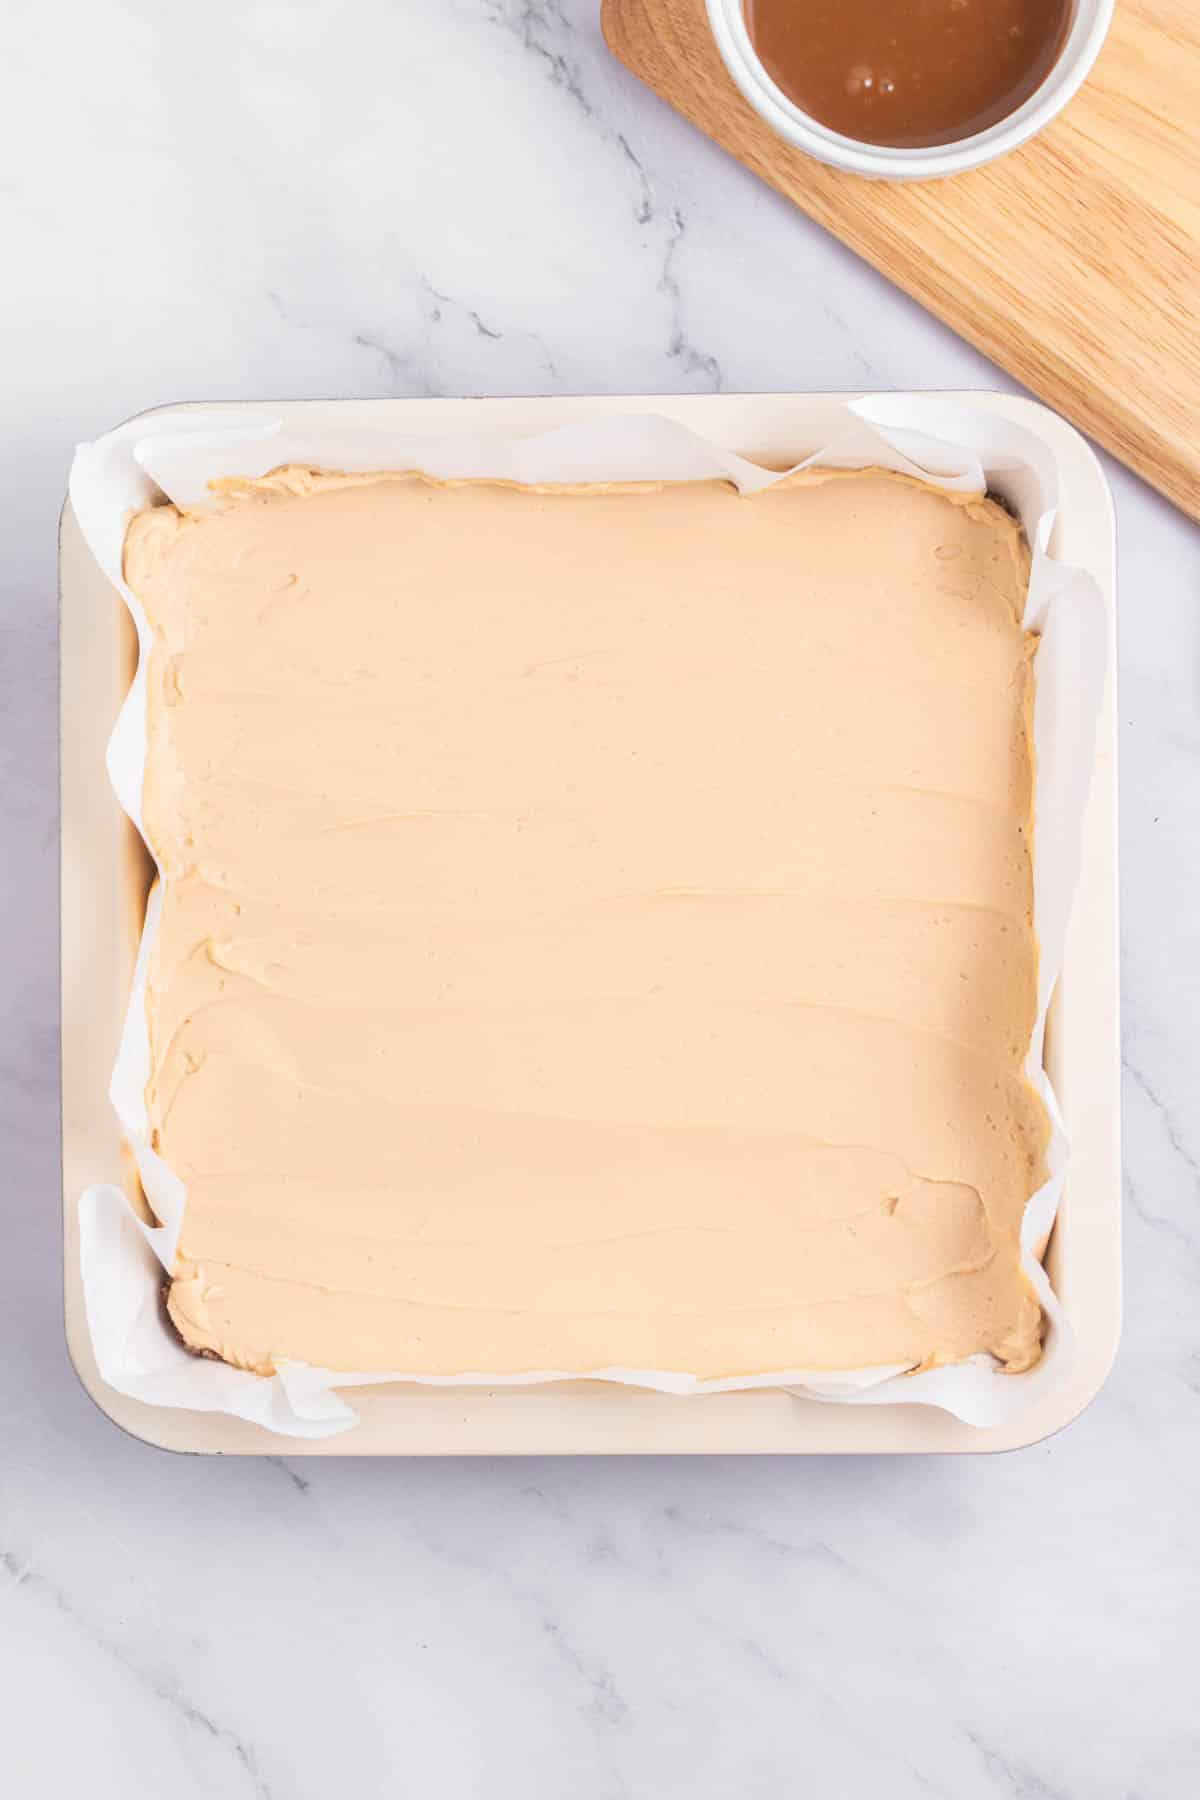 Put the cheesecake batter into a square pan.